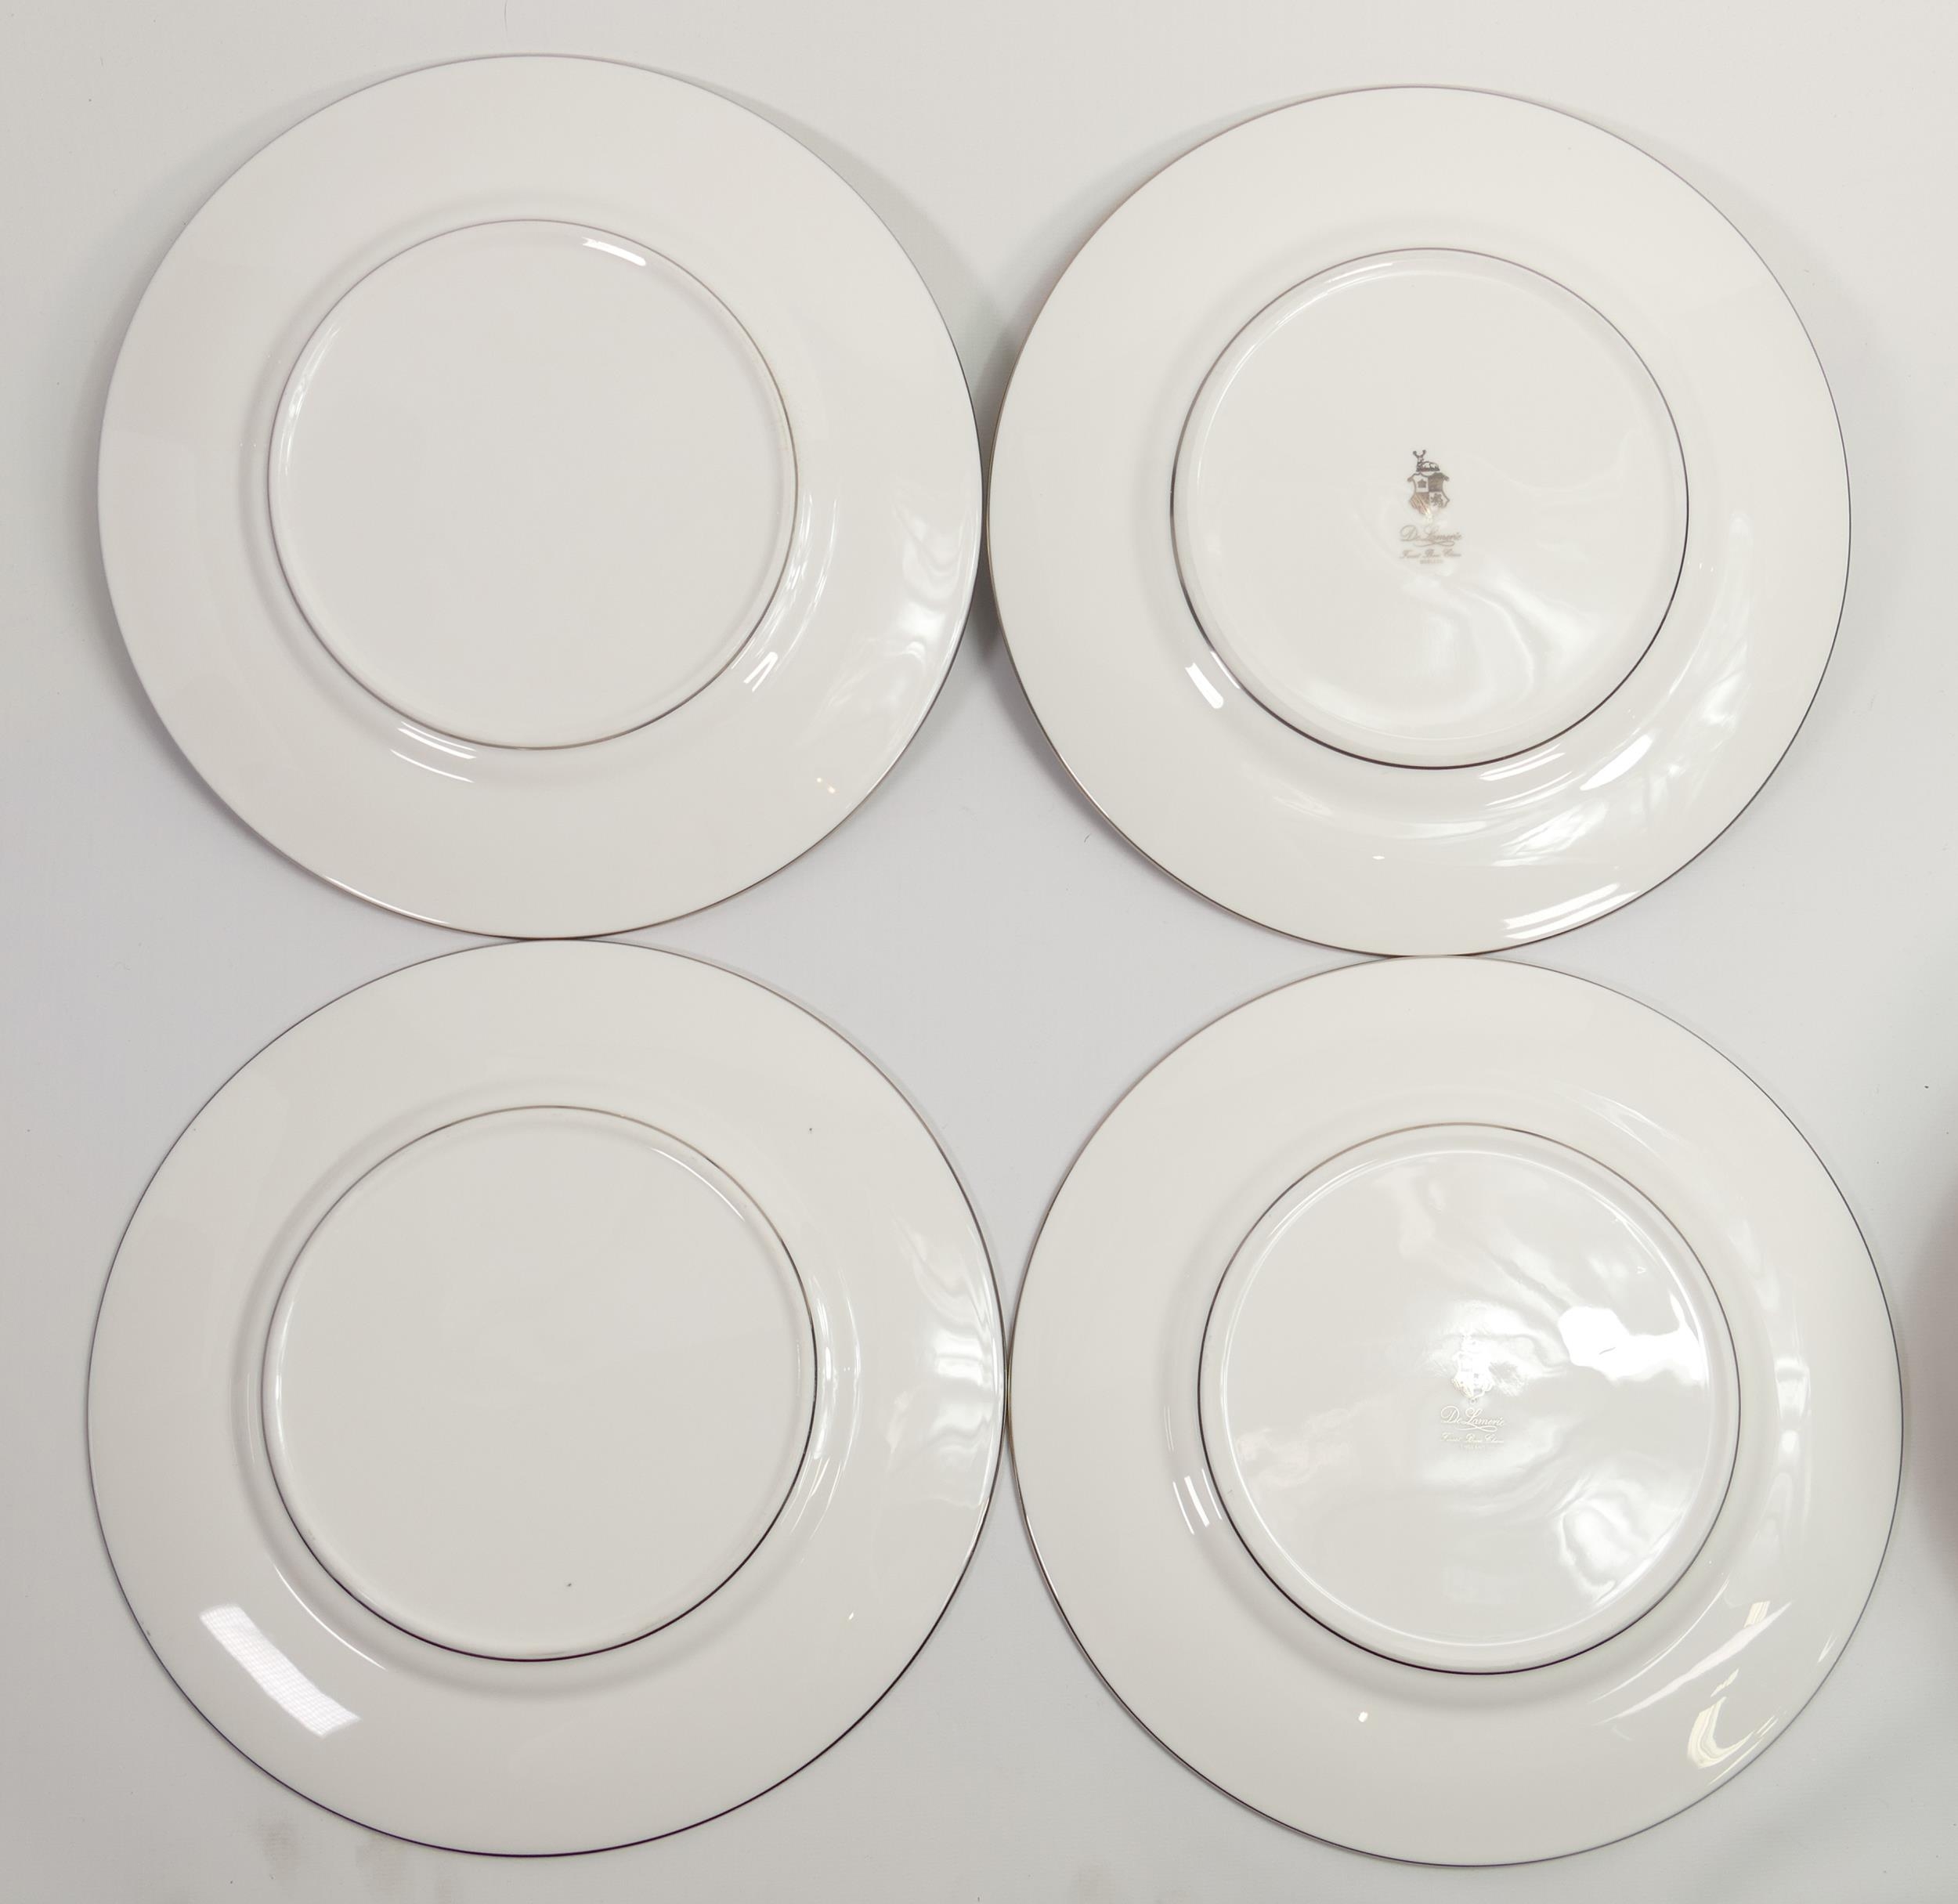 De Lamerie Fine Bone China heavily gilded Royal Bow Dinner Plates, specially made high end quality - Image 2 of 2